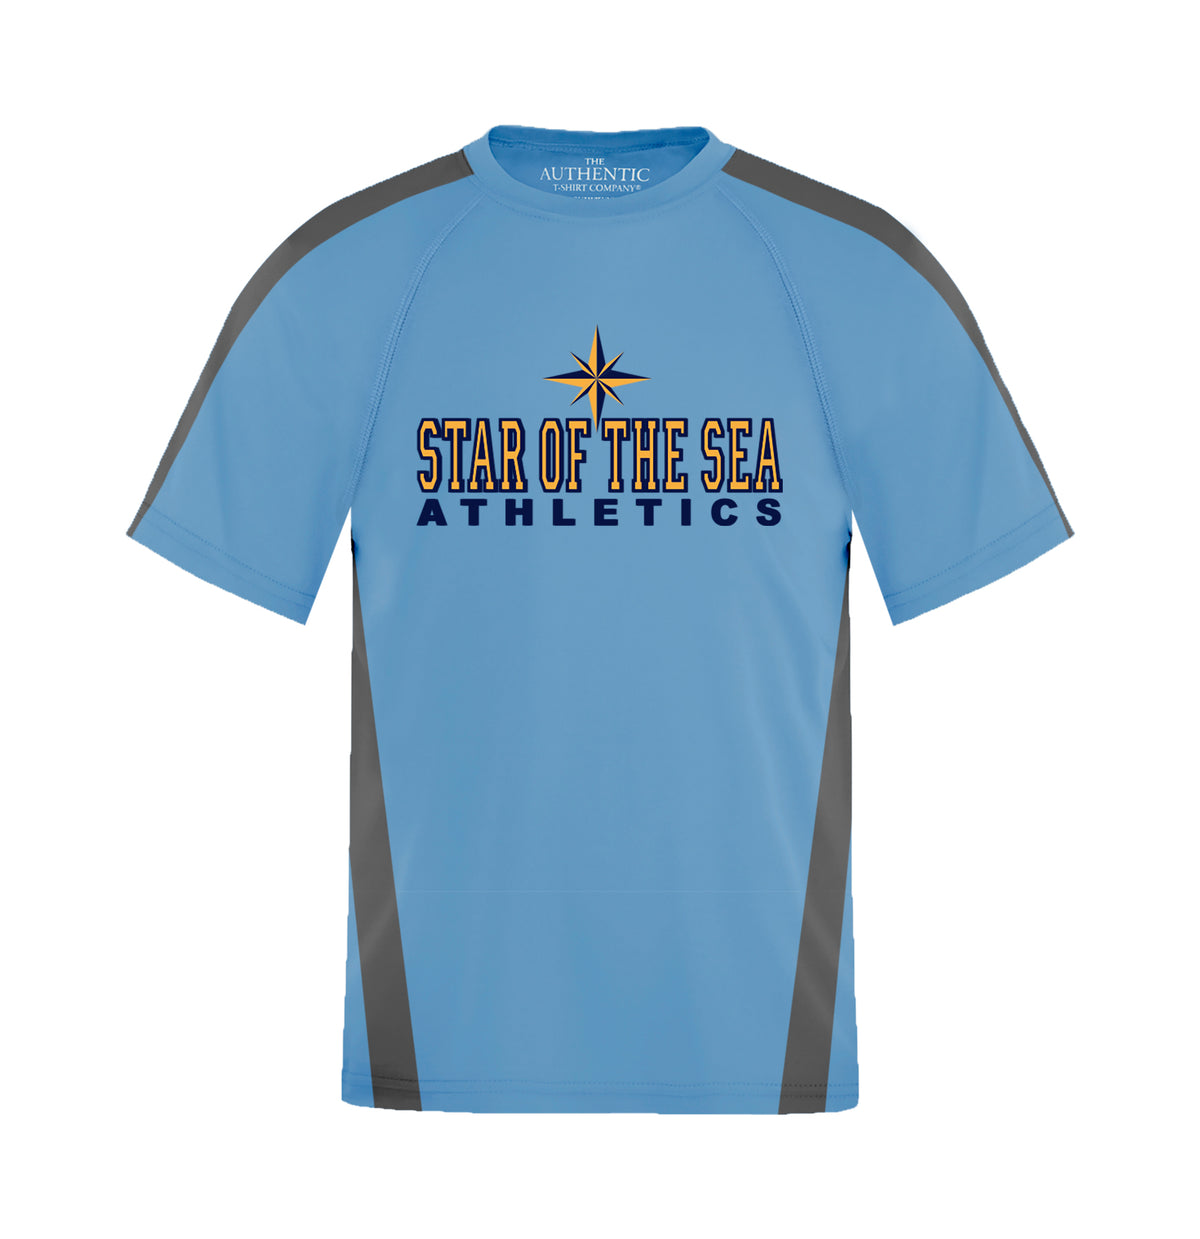 STAR OF THE SEA GYM T-SHIRT, WICKING, YOUTH